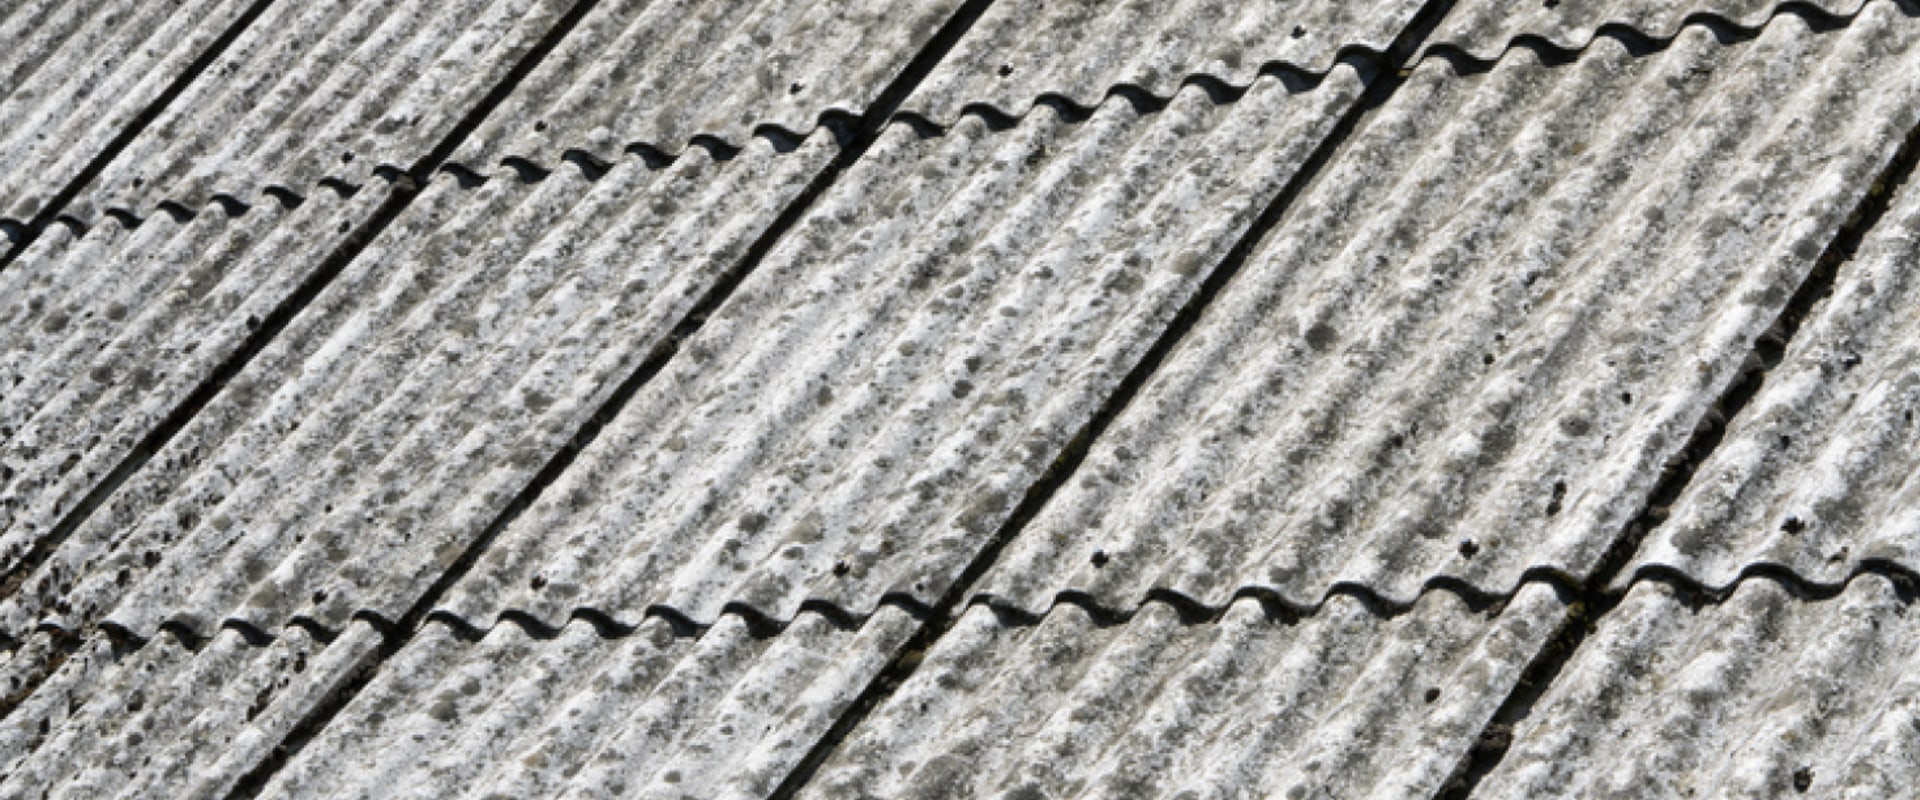 How long can you leave roofing felt exposed?